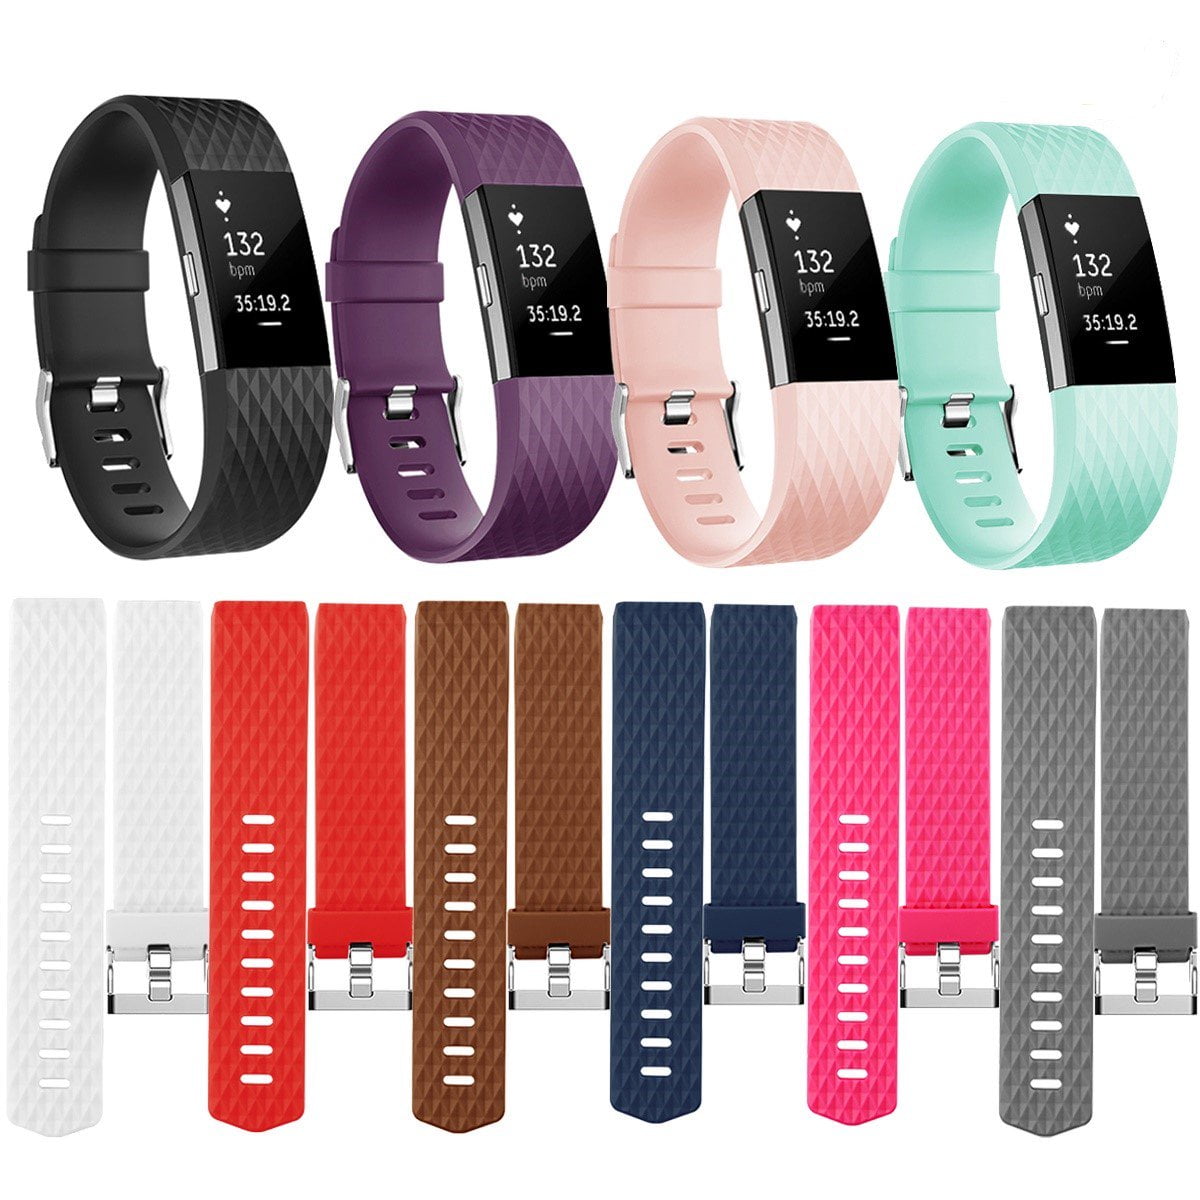 Large Small Breathable Woven Fabric Replacement Accessory Strap Compatible with Fitbit Charge 2 and Charge 2 SE Fitness Activity Tracker Maledan Compatible with Fitbit Charge 2 Bands for Women Men 